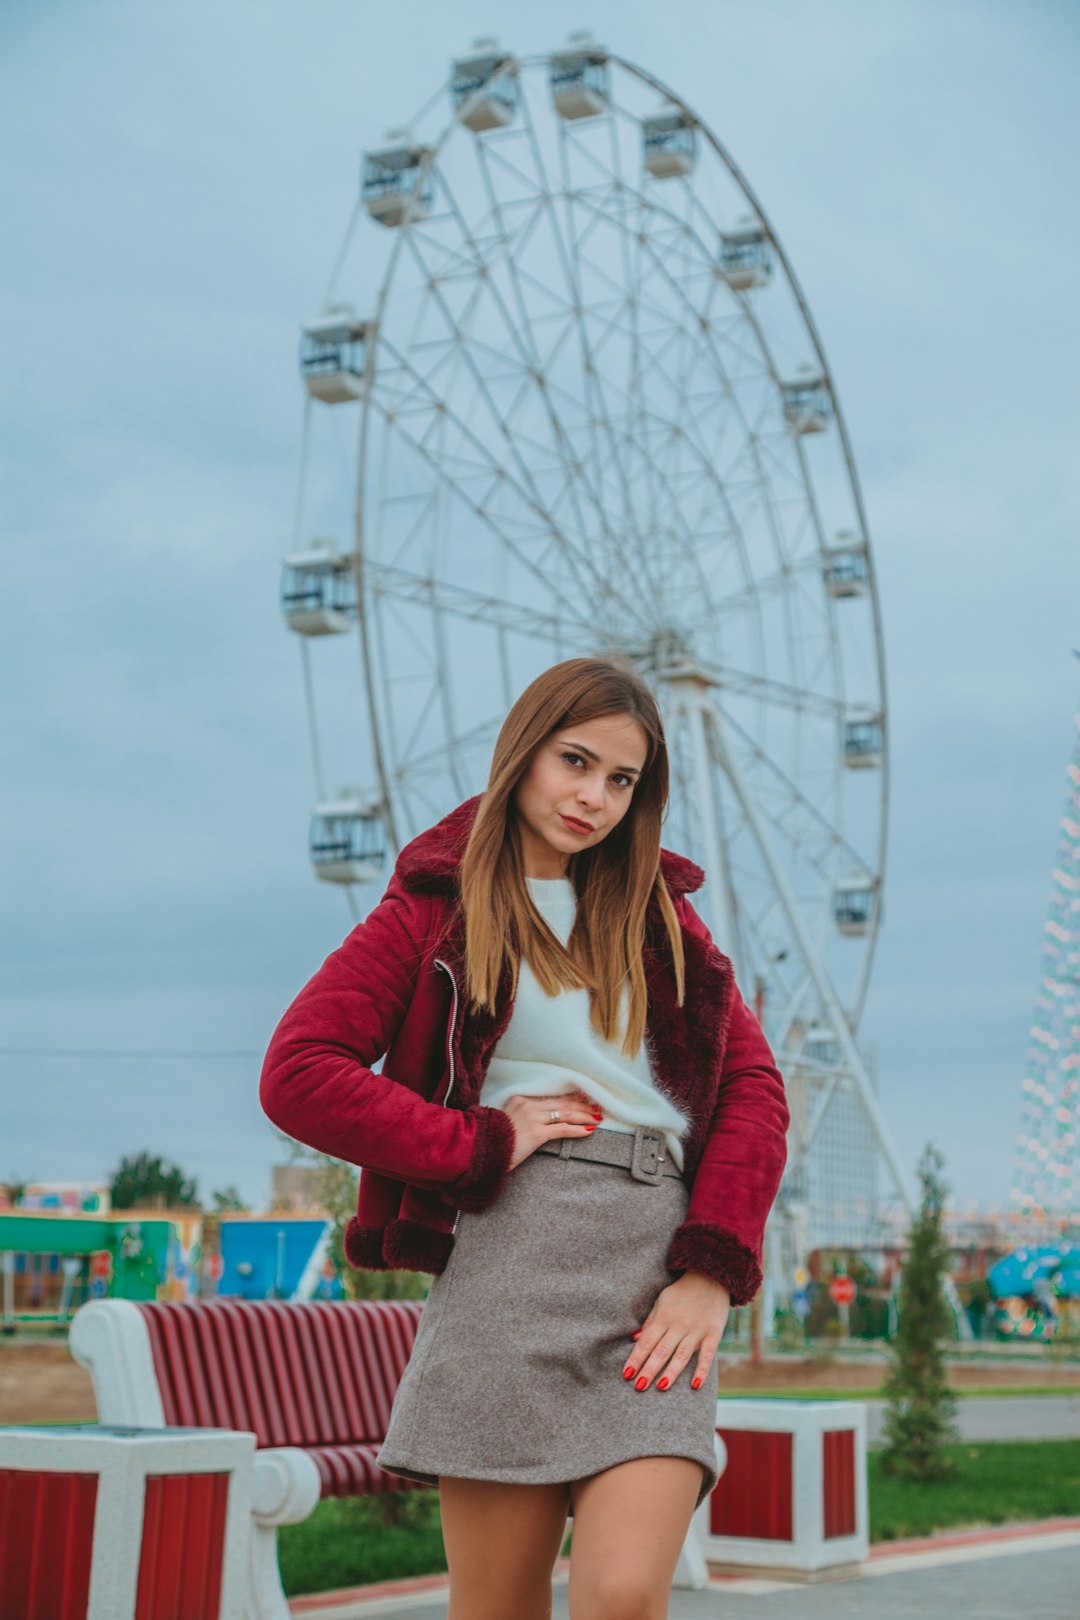 woman in red long sleeve shirt and gray pants standing near ferris wheel during daytime